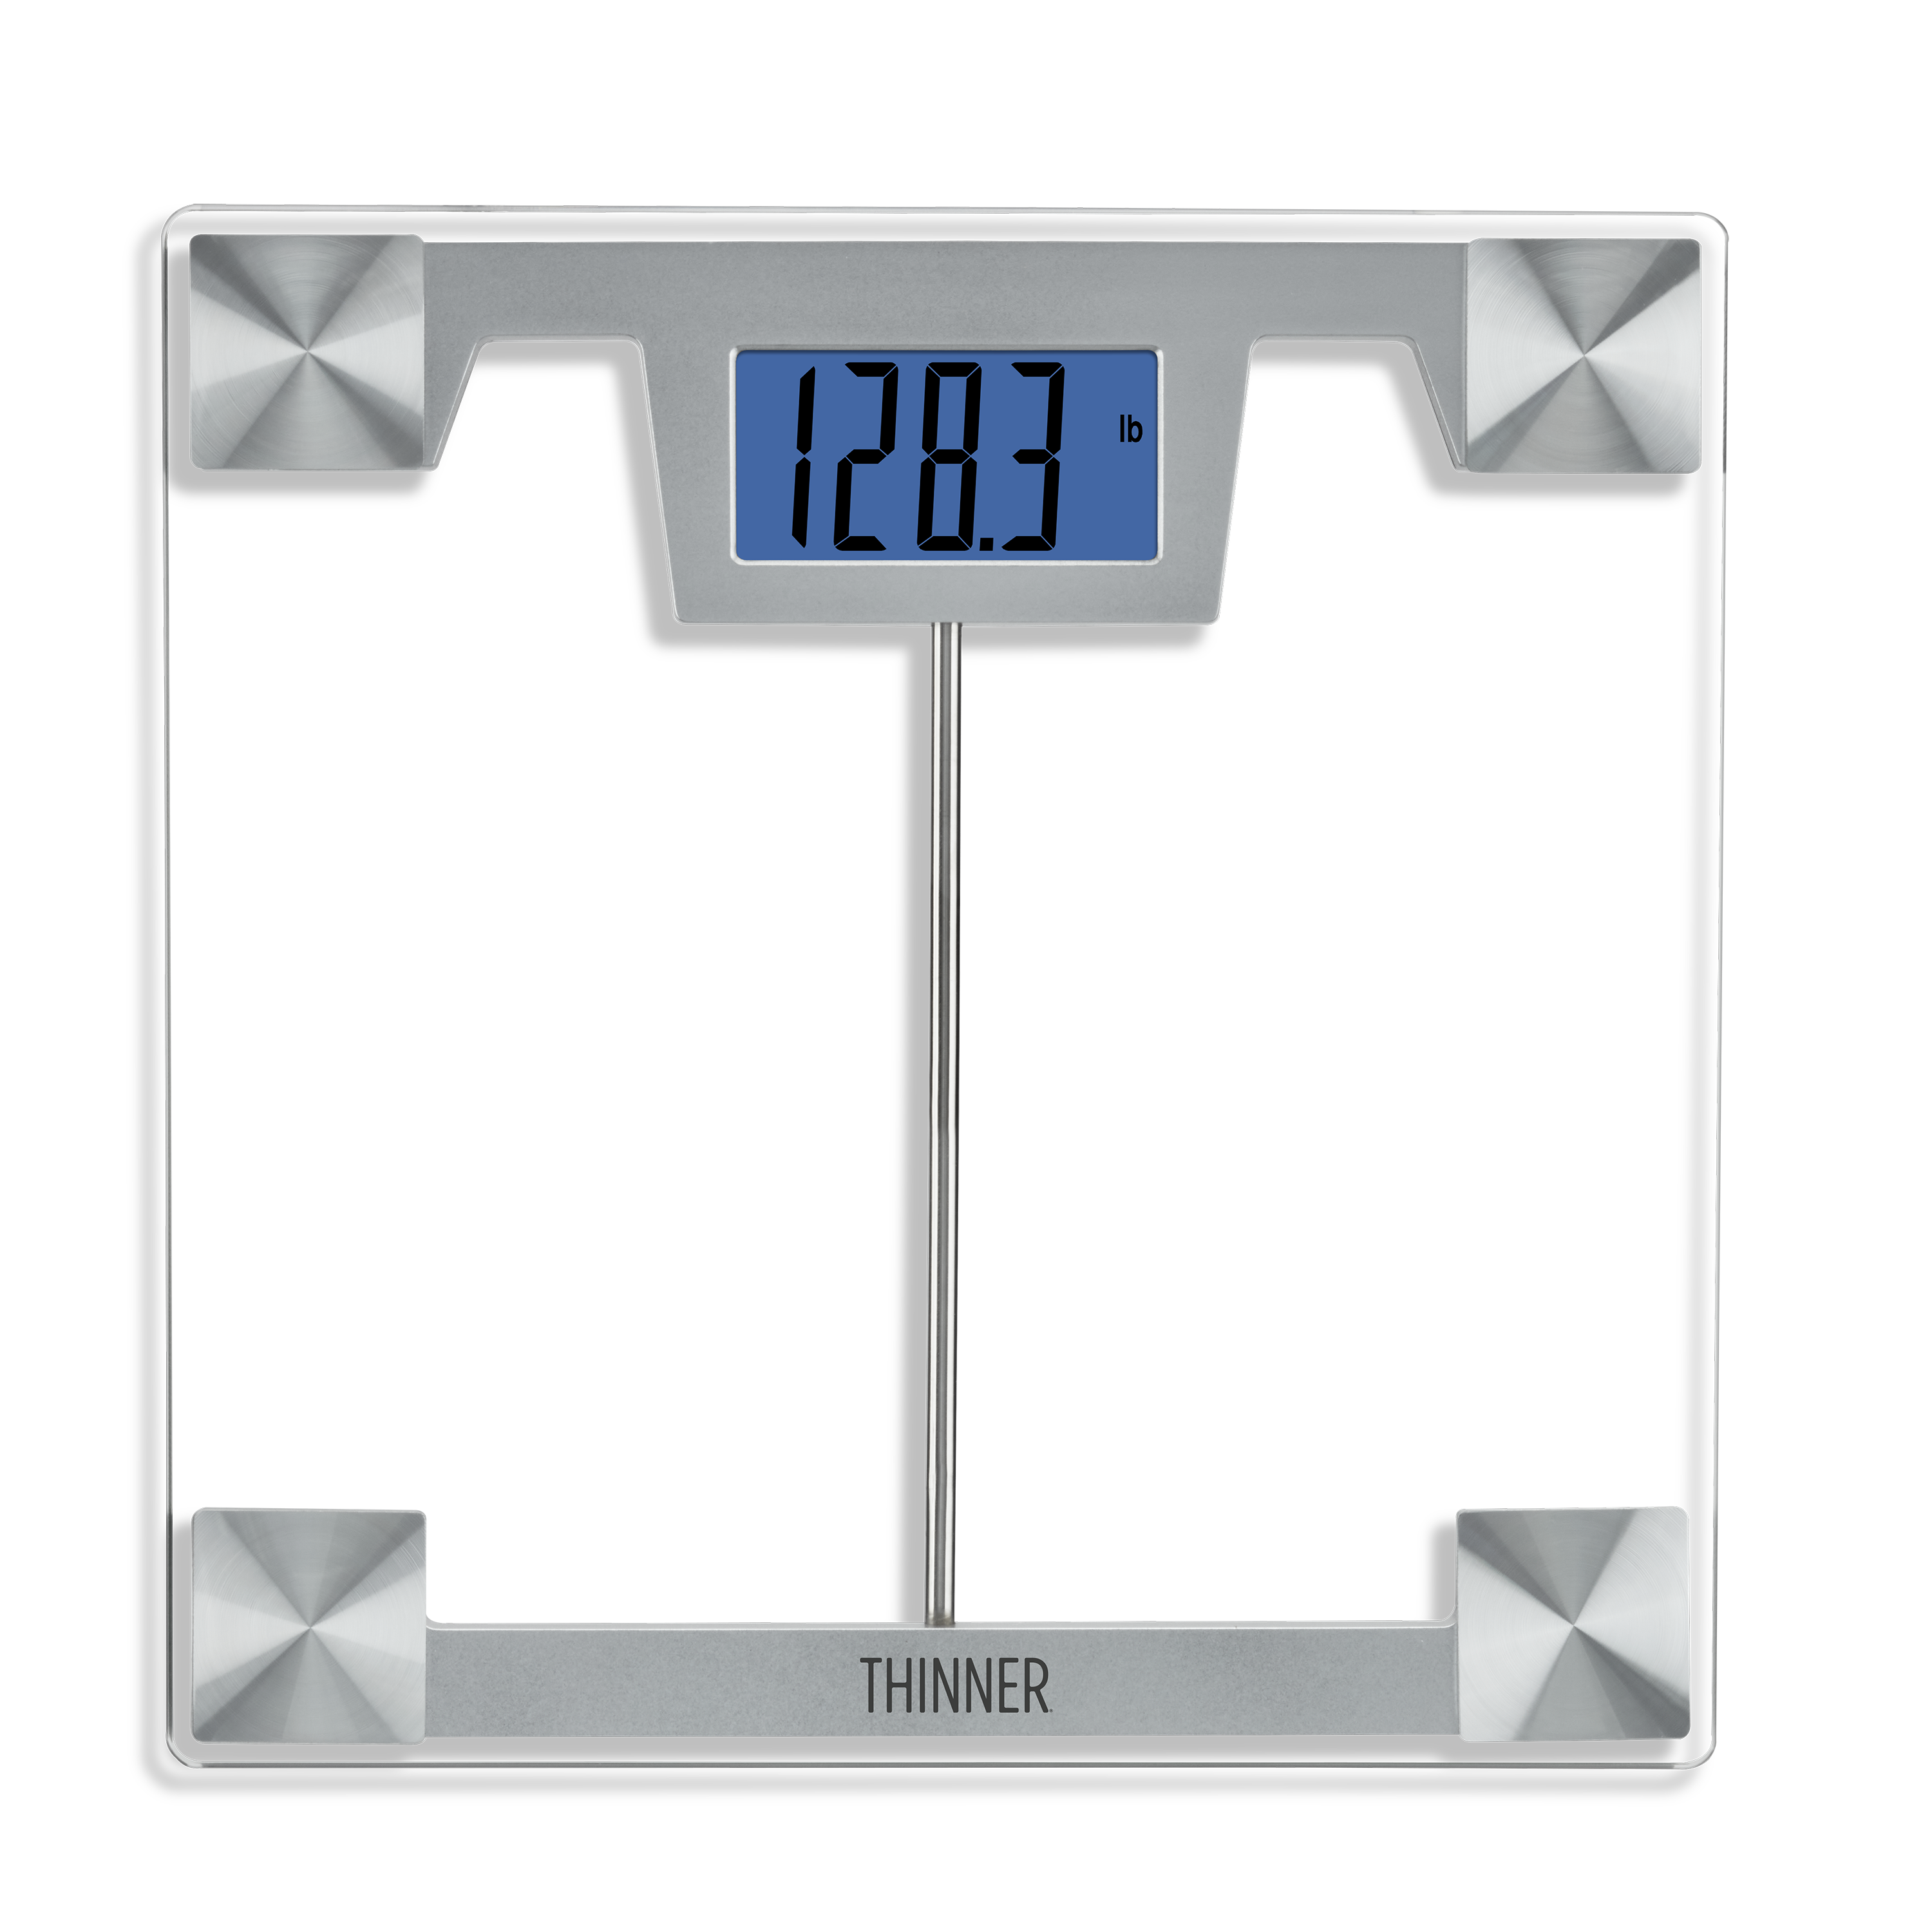 https://www.conair.com/on/demandware.static/-/Sites-master-us/default/dw582637e0/TH322-new/TH322-Thinner__Digital_Glass_Weight_Scale_by_Conair_new-MAIN.png